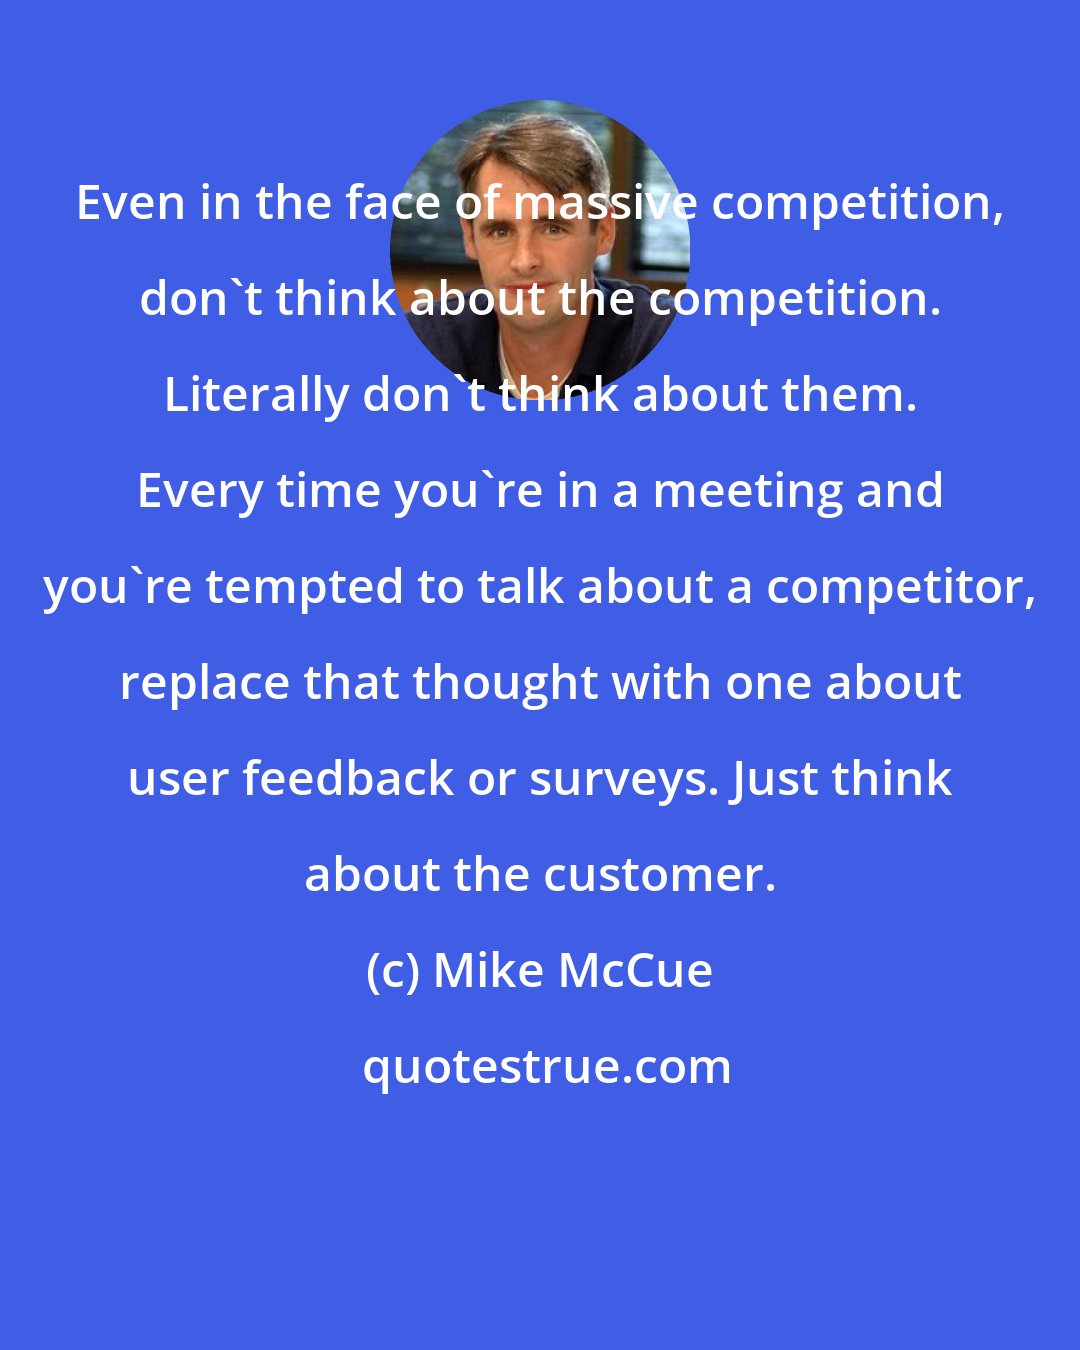 Mike McCue: Even in the face of massive competition, don't think about the competition. Literally don't think about them. Every time you're in a meeting and you're tempted to talk about a competitor, replace that thought with one about user feedback or surveys. Just think about the customer.